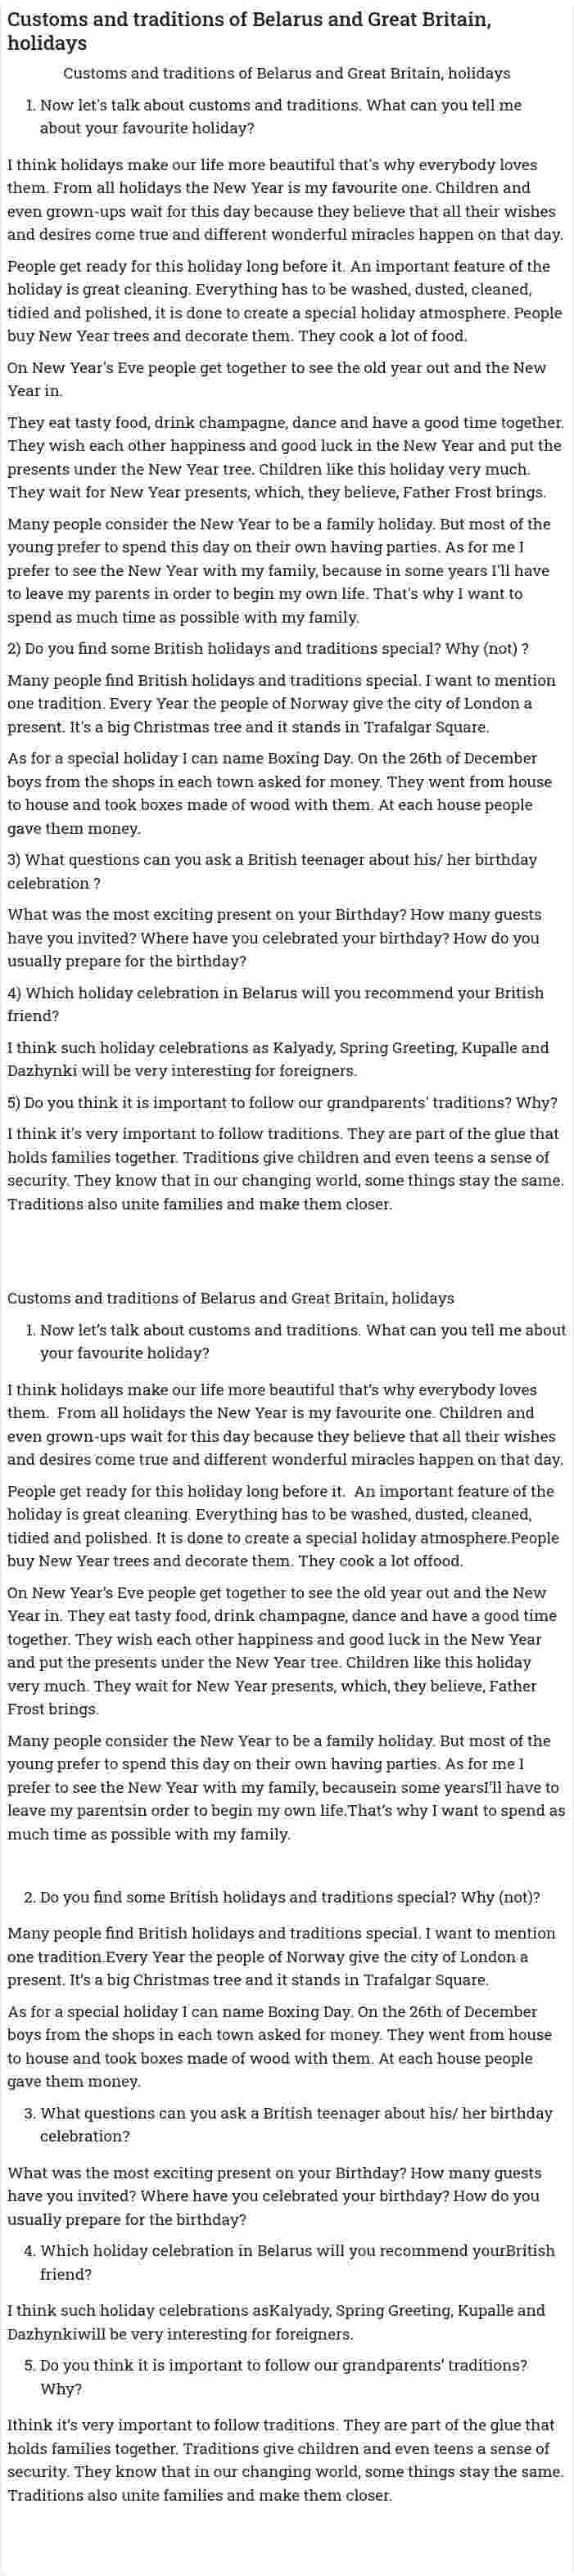 Customs and traditions of Belarus and Great Britain, holidays